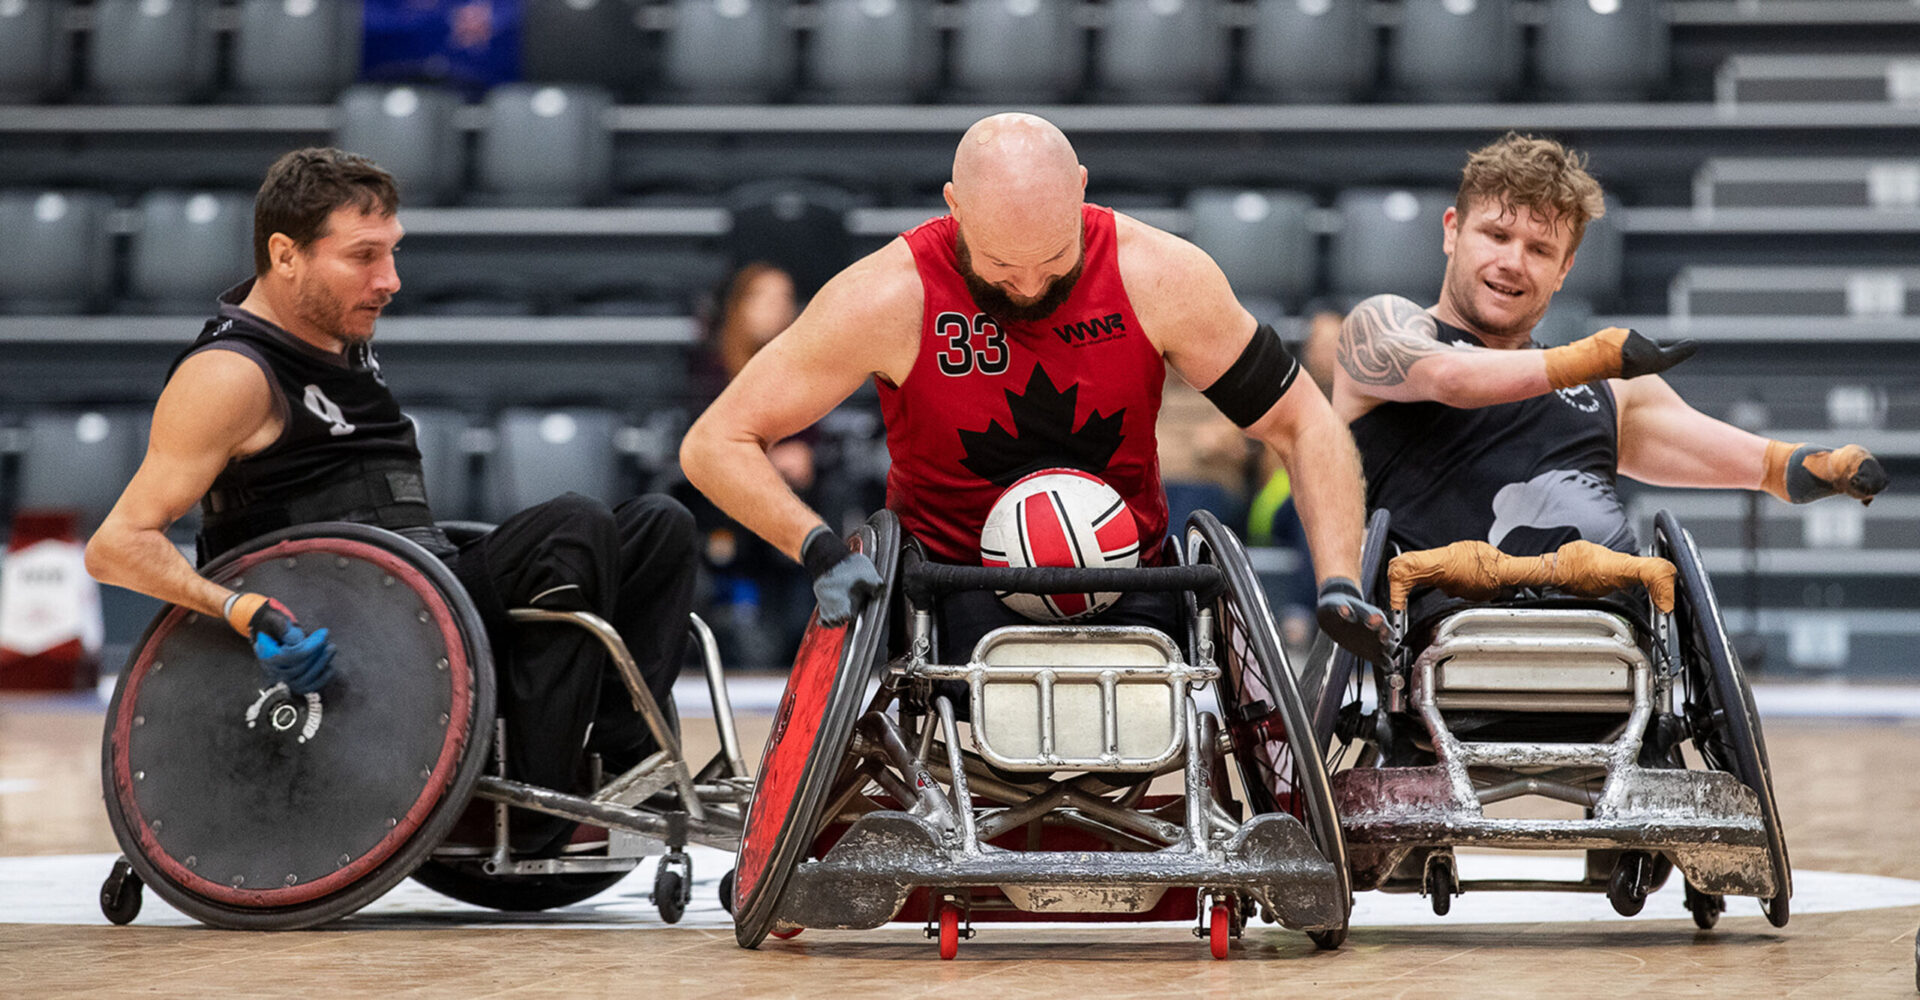 Strong Second Half For Canada In Win Over New Zealand At 2022 Wheelchair Rugby World Championship